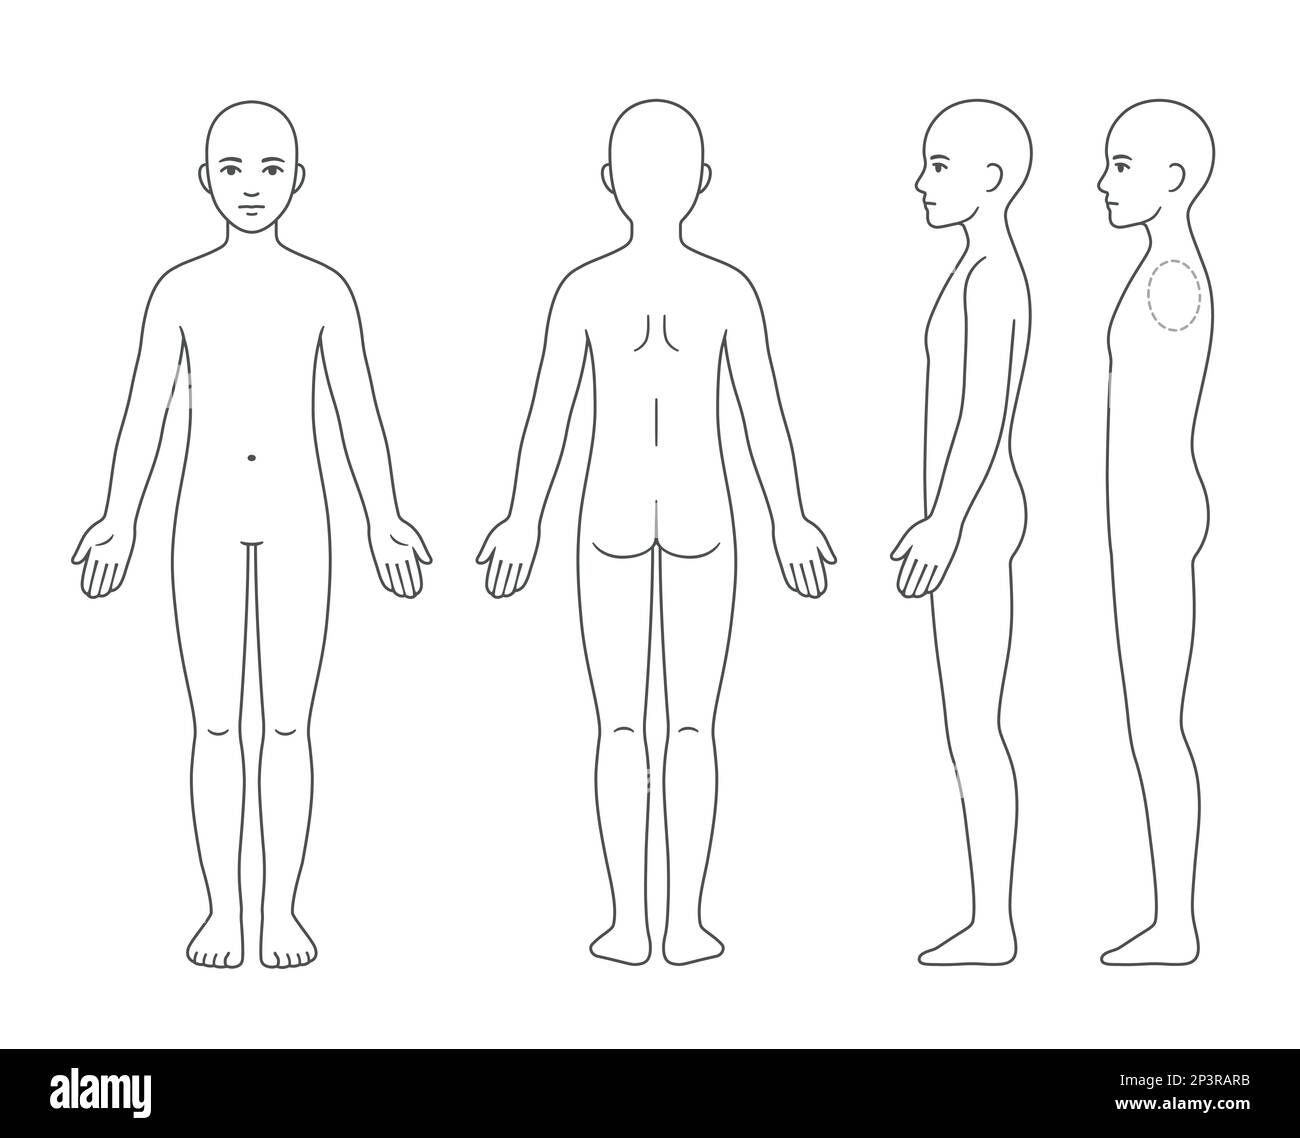 Unisex body anatomy chart, naked young person of undefined gender